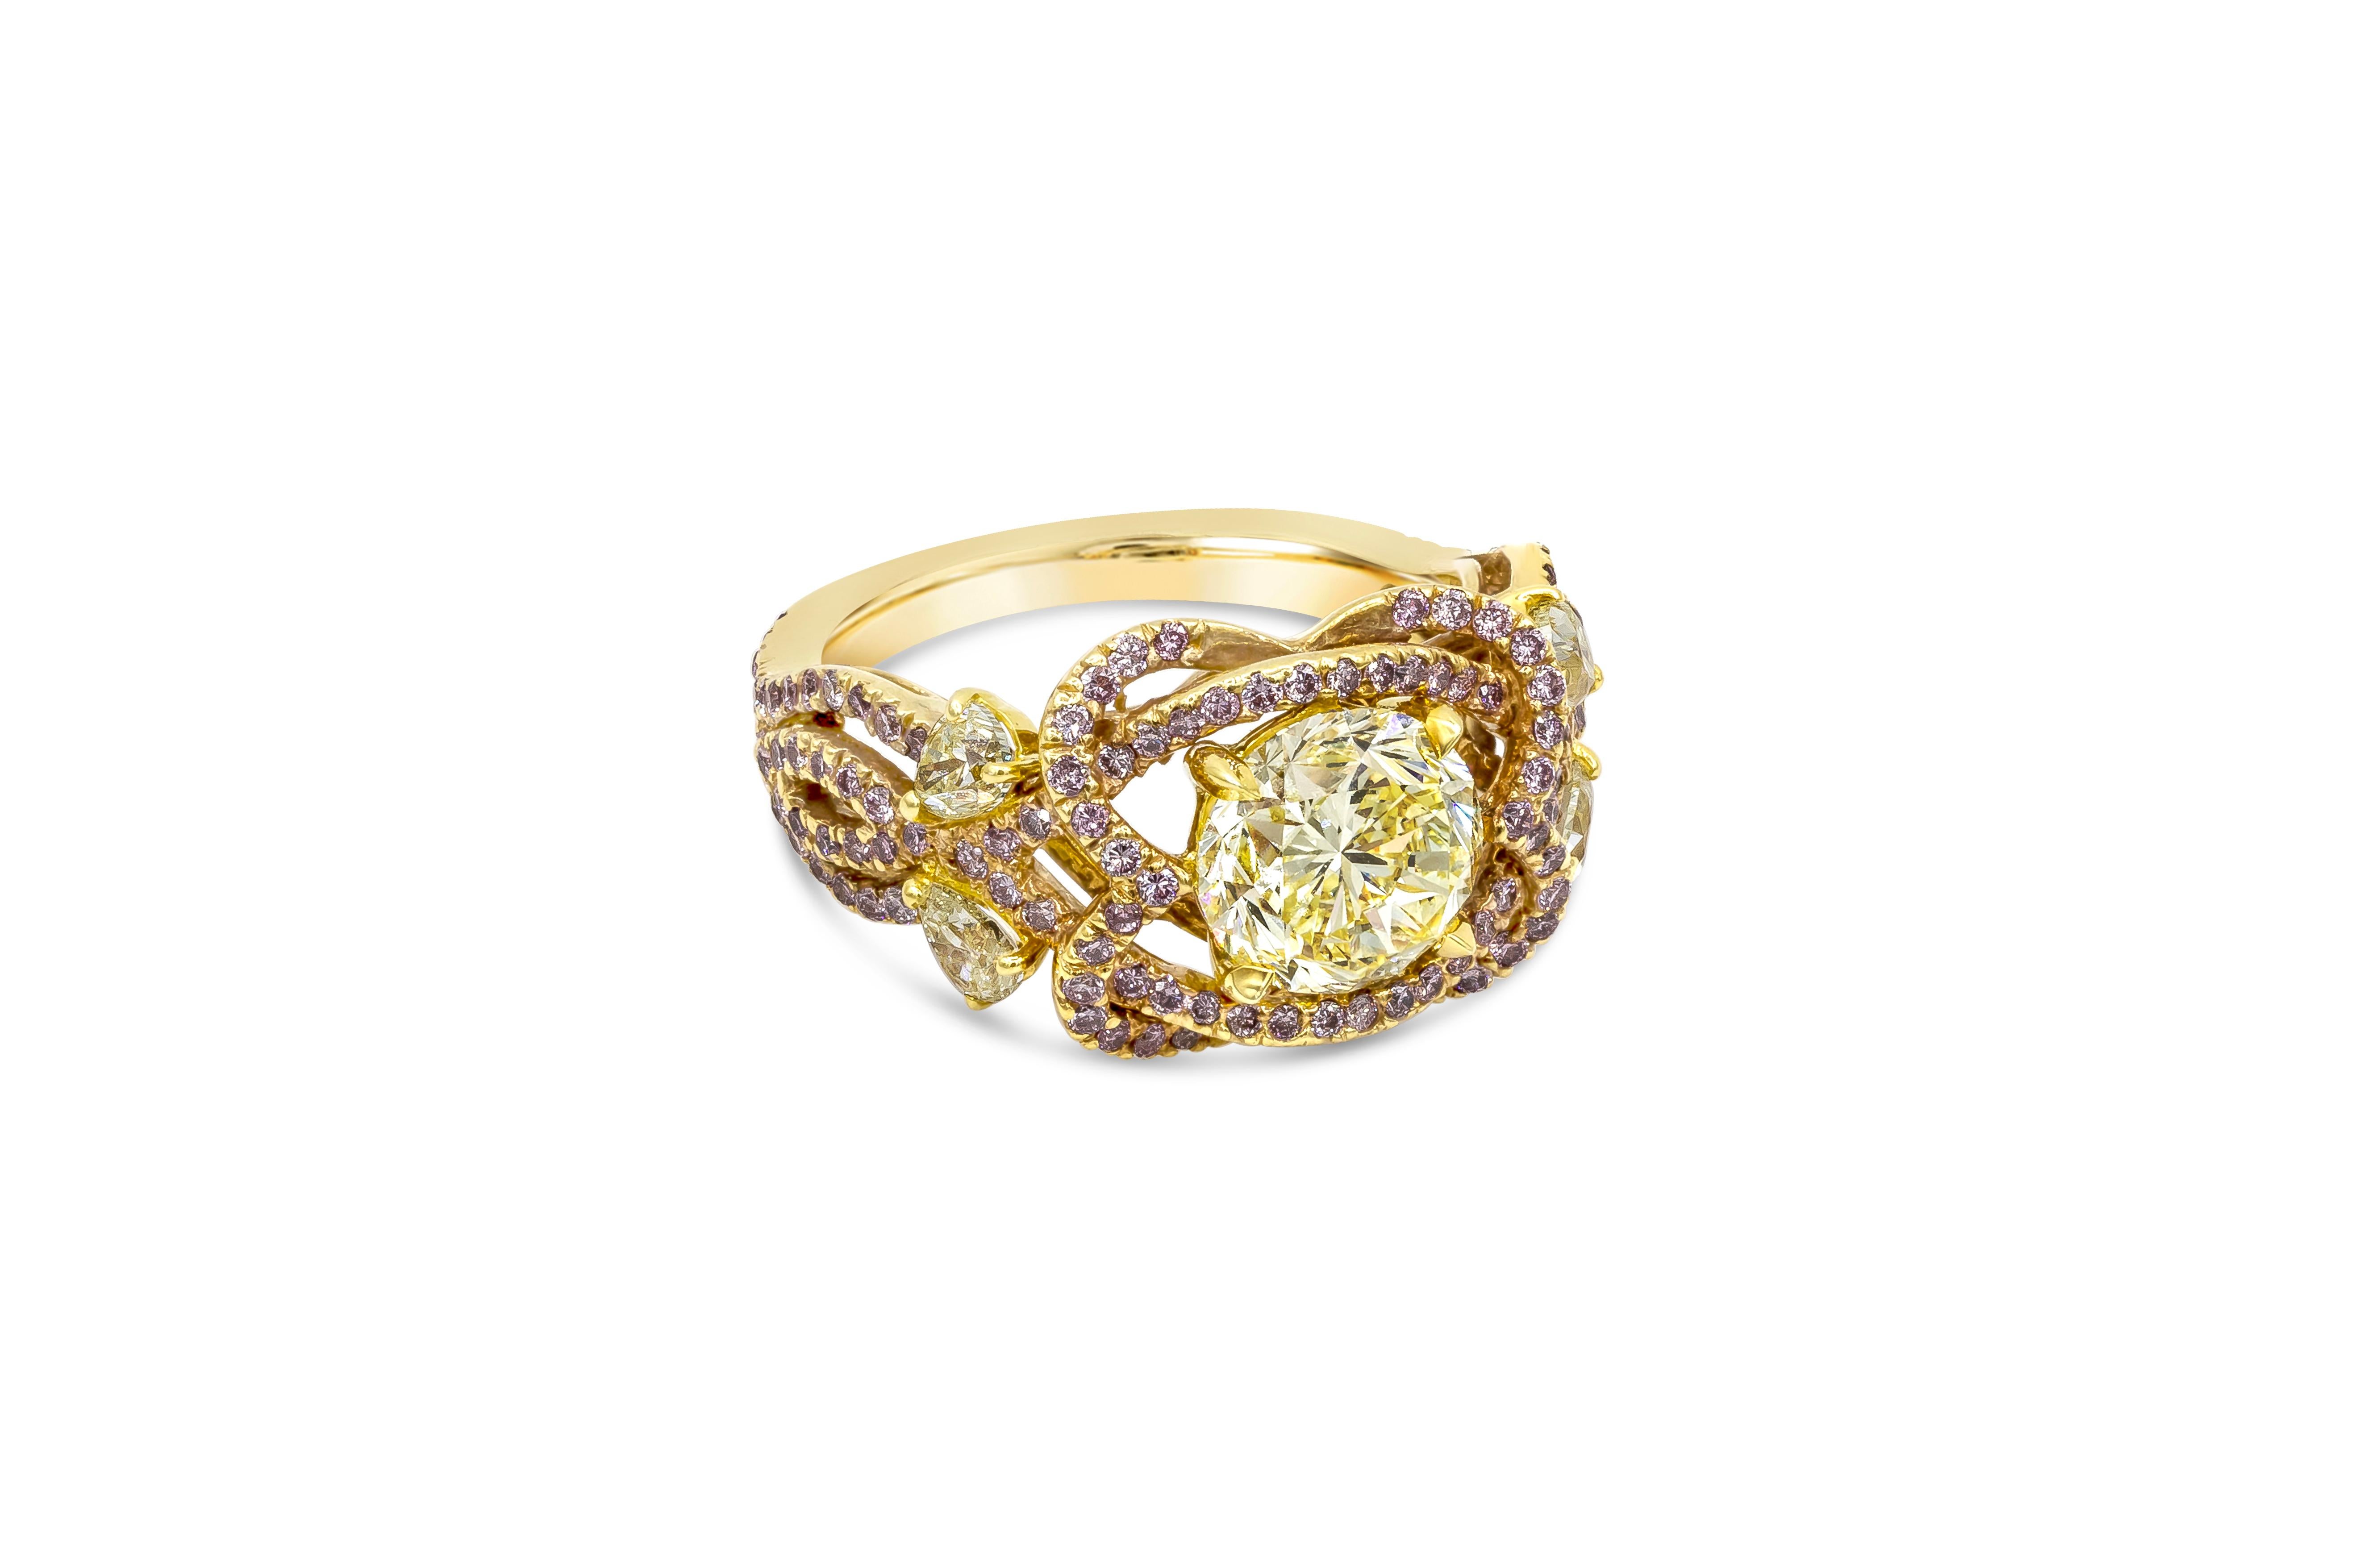 A unique and fashionable engagement ring style showcasing a 1.97 carats round brilliant diamond, certified by GIA as Fancy Intense Yellow color, VS1 in clarity. Center diamond is set in an open-work, intricately-designed weaving band accented with